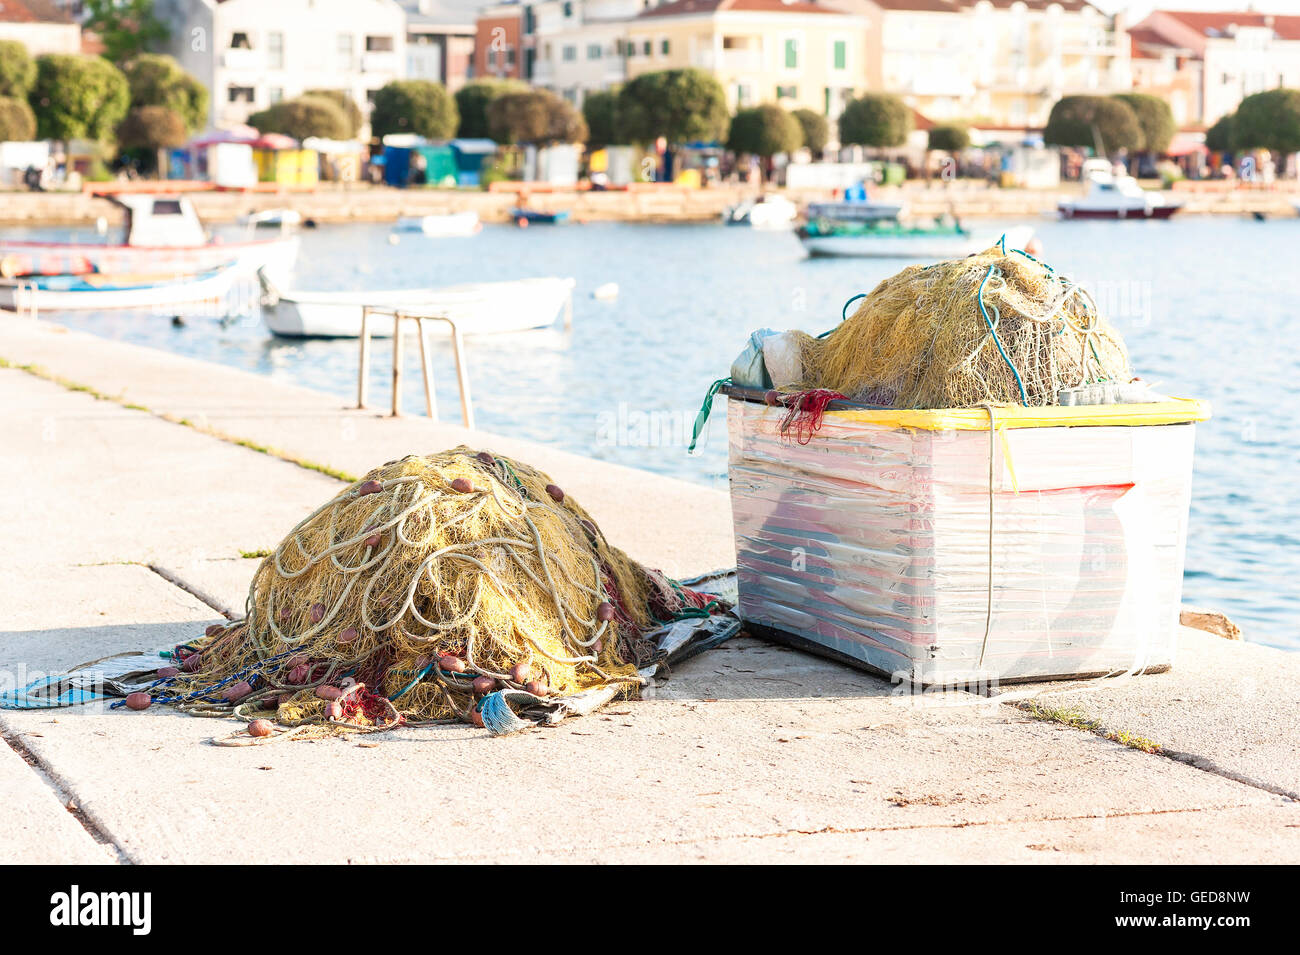 A large fishing net piled on the dock Stock Photo